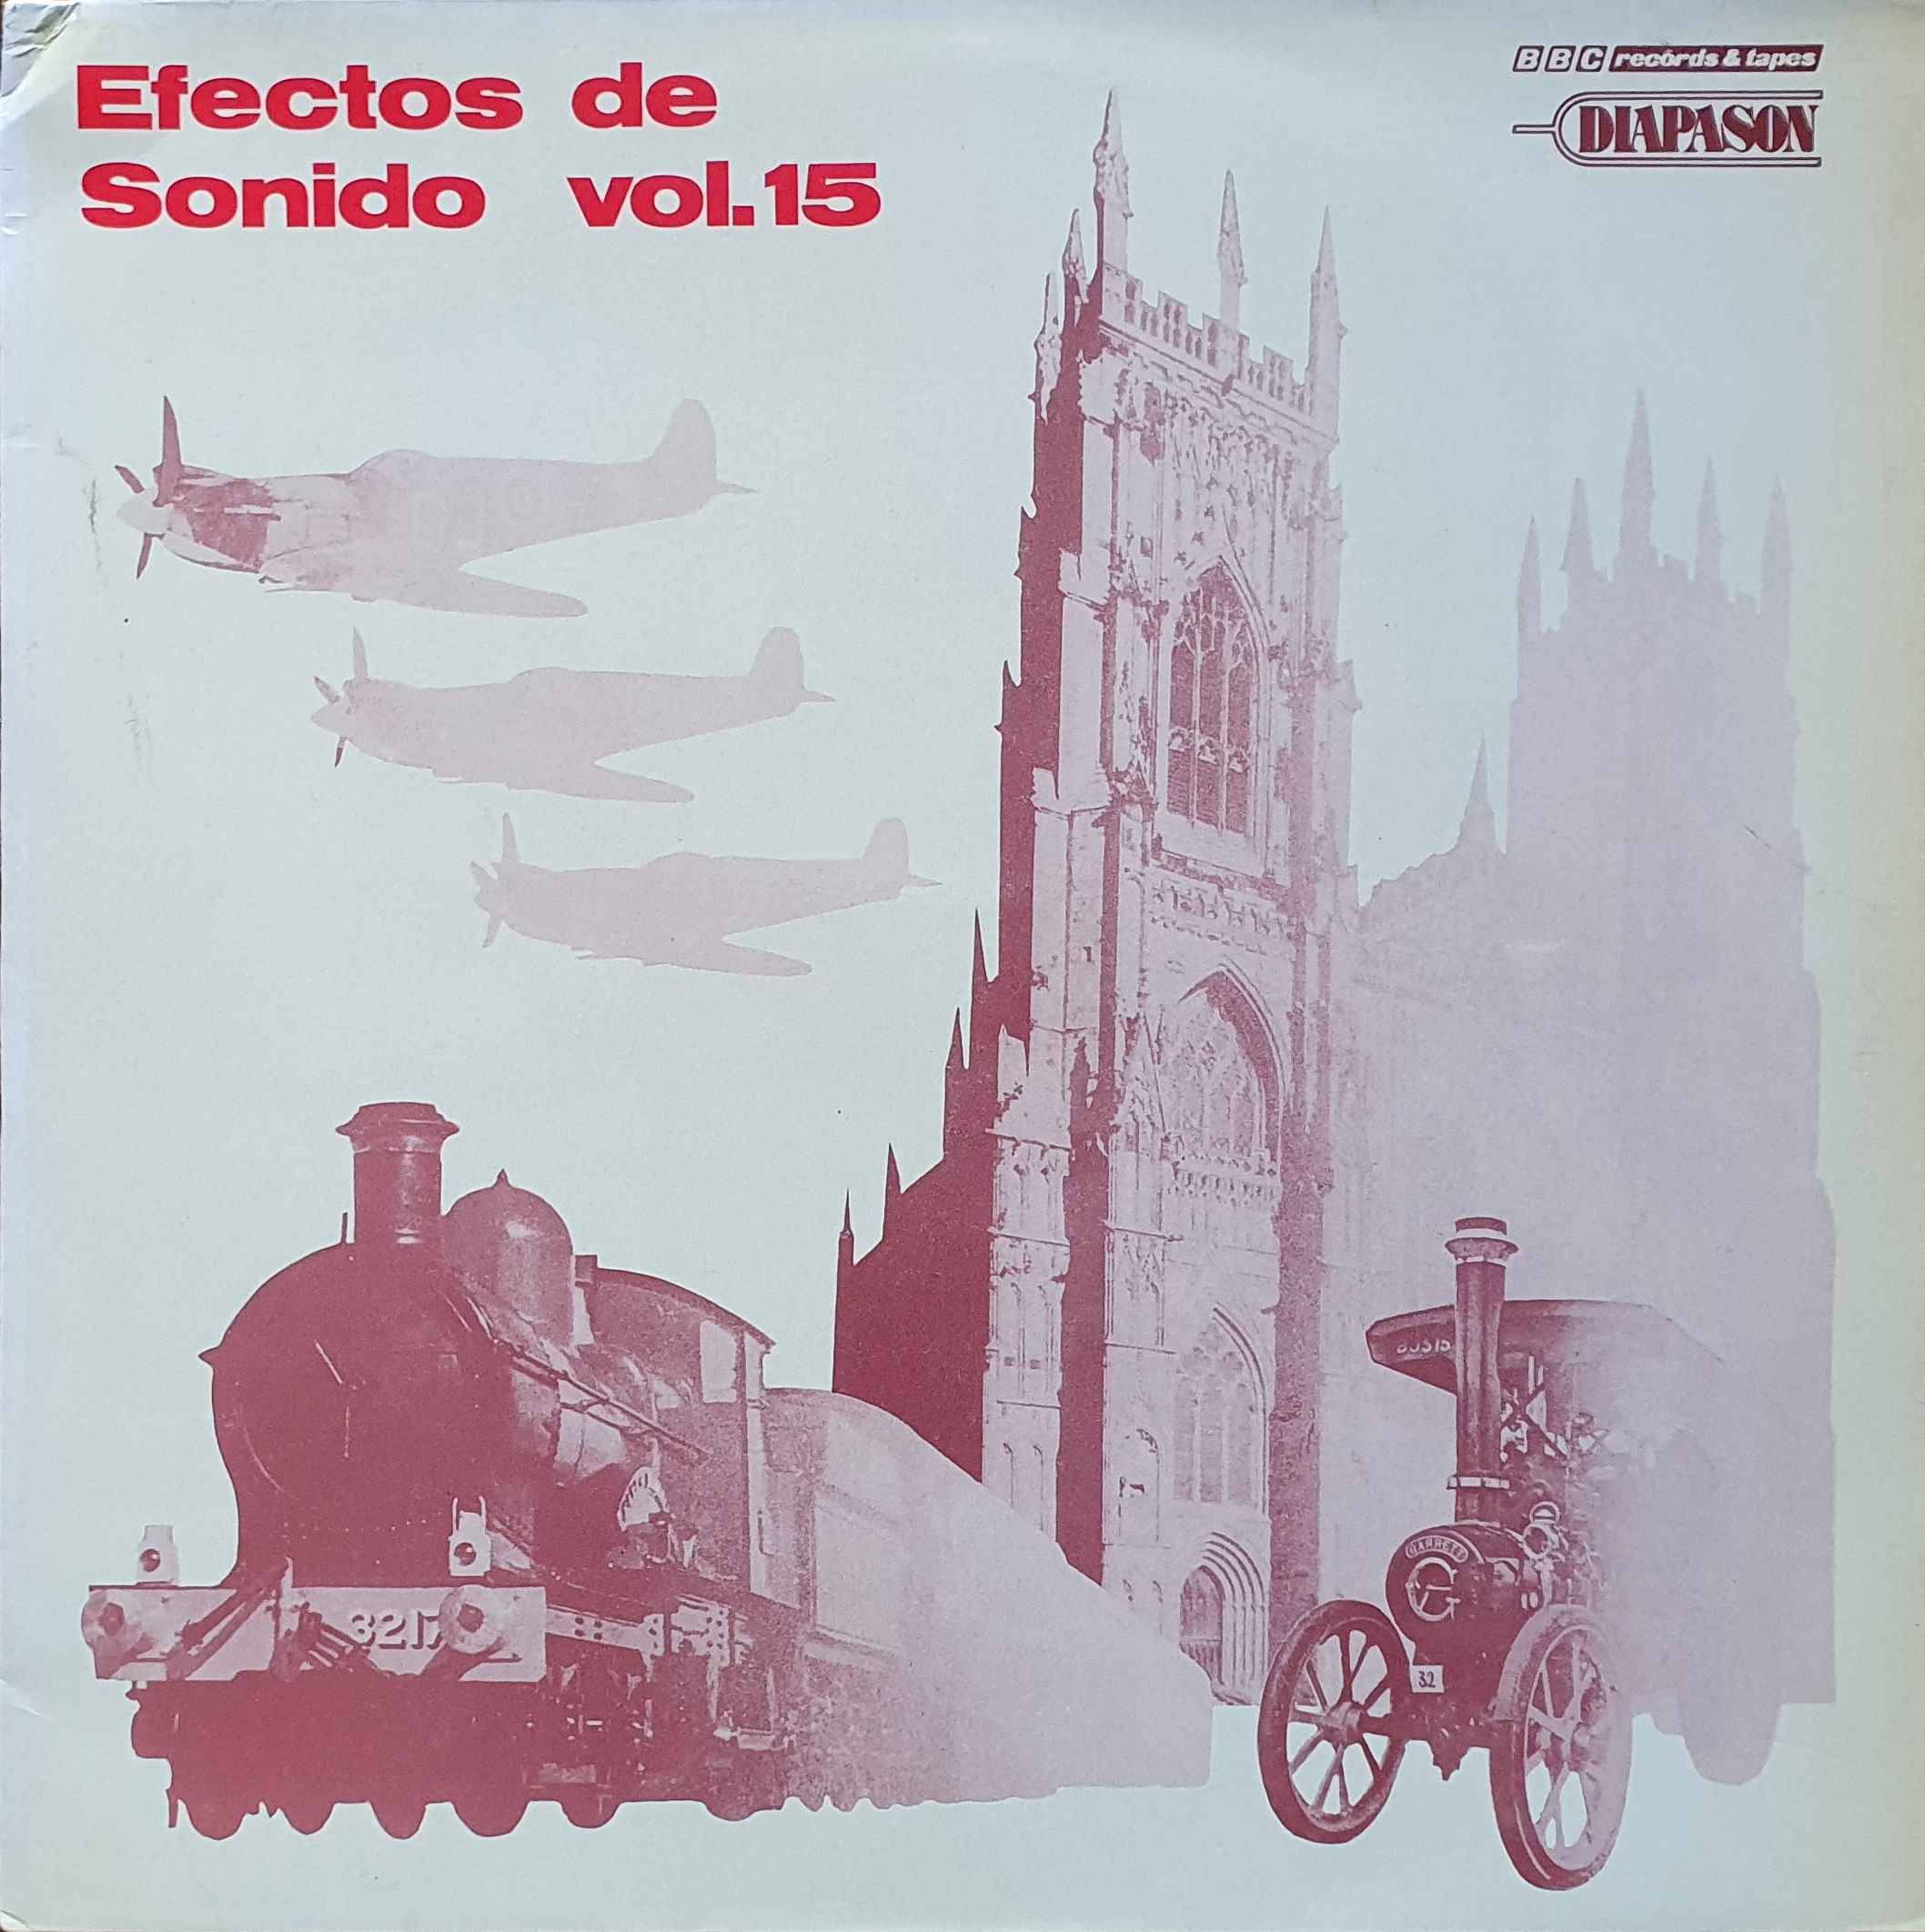 Picture of 51.0119 Efectos de sonido Vol. 15 by artist Various from the BBC albums - Records and Tapes library